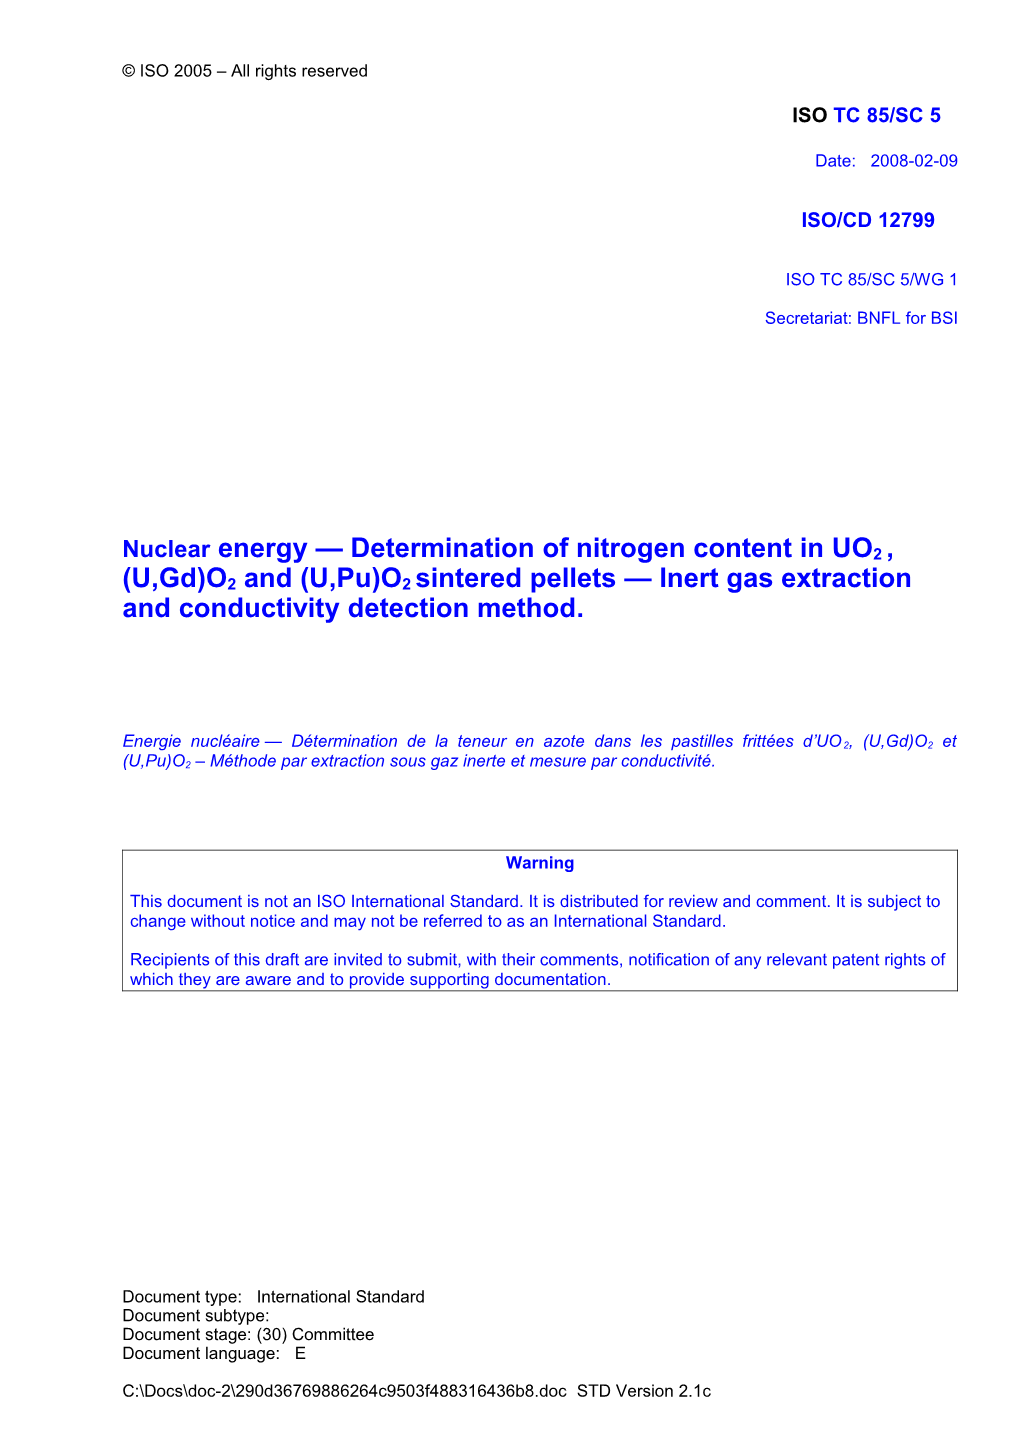 Nuclear Energy Determination of Nitrogen Content in UO2, (U,Gd)O2and (U,Pu)O2sintered